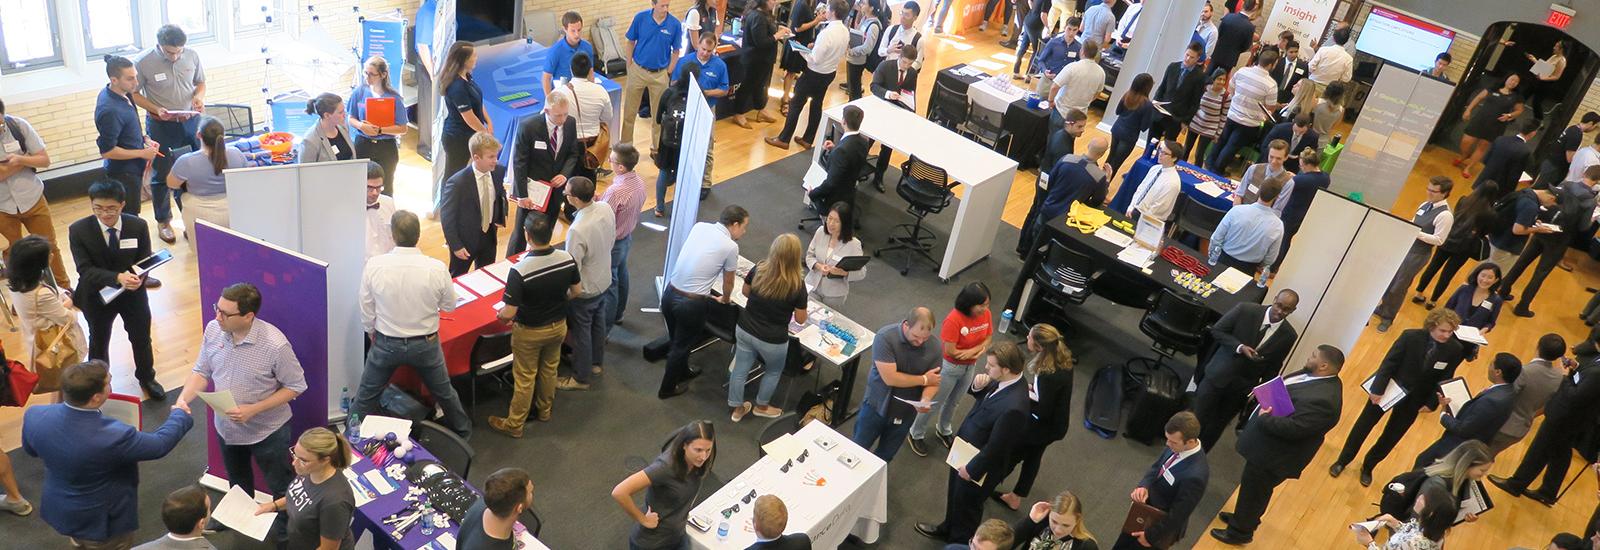 Overhead view of a crowded Career Expo